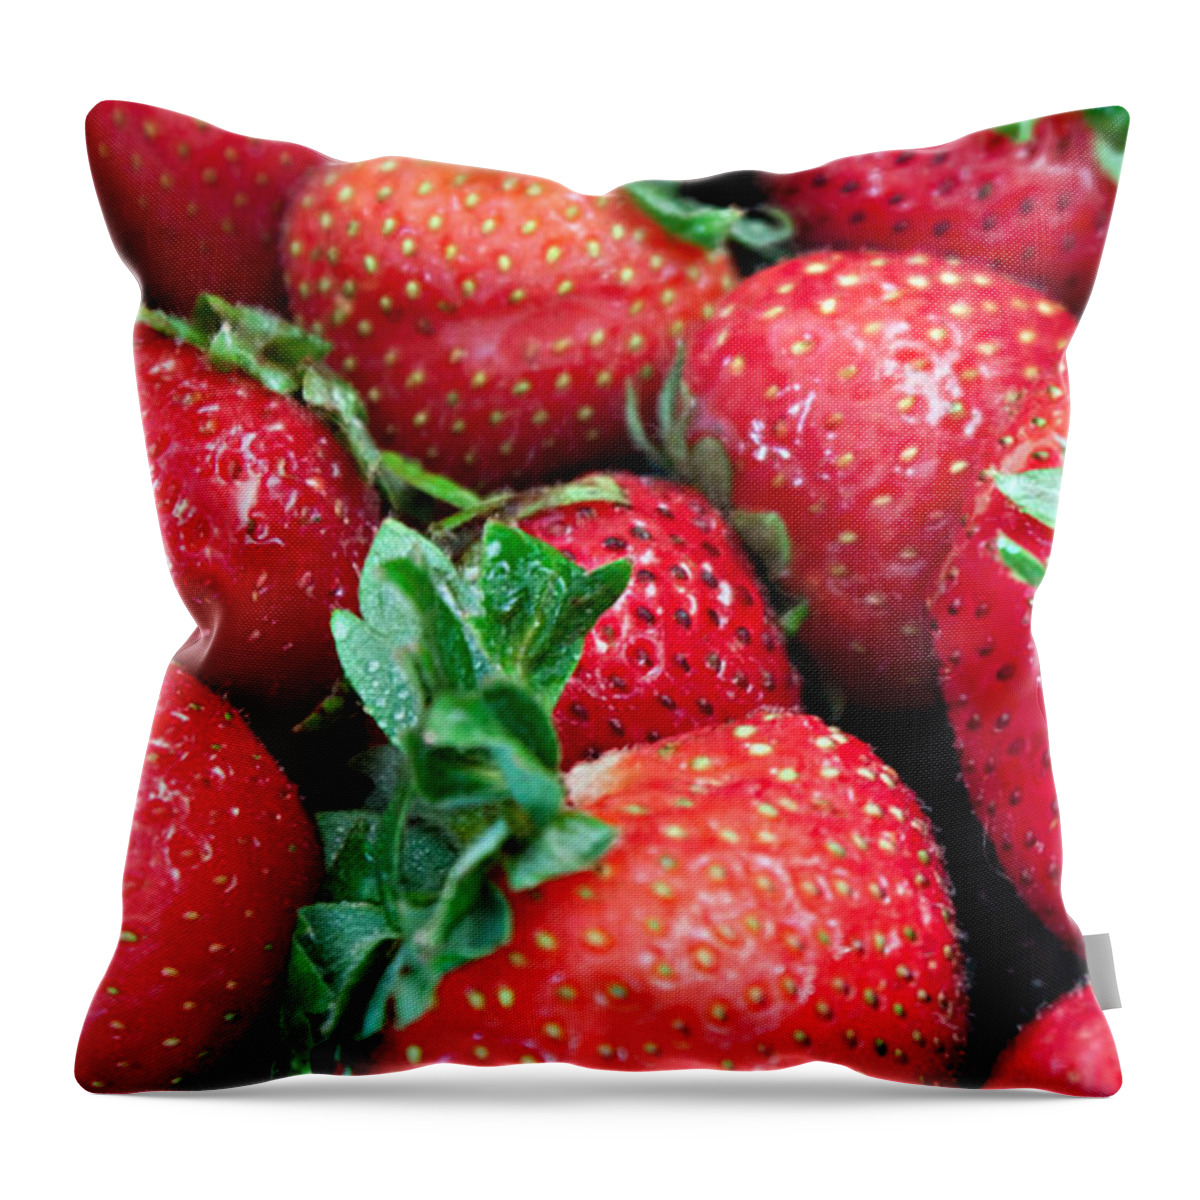 Strawberry Throw Pillow featuring the photograph Strawberry Delight by Sherry Hallemeier